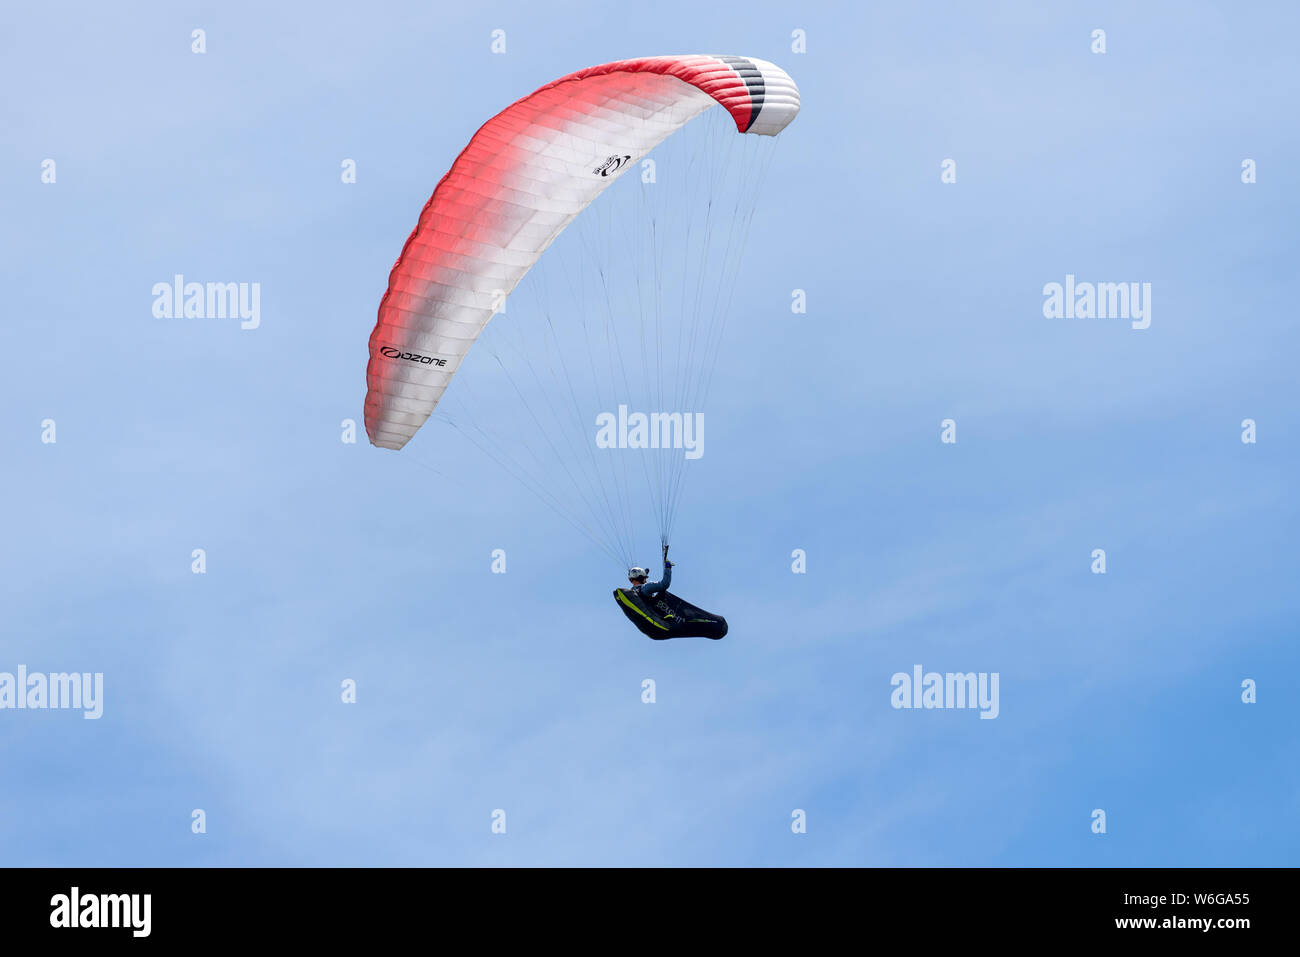 Gliding In Blue Sky - A paraglider pilot sitting comfortably in cushioned harness and enjoying flying in blue sky. Lookout Mountain, Golden, CO, USA. Stock Photo